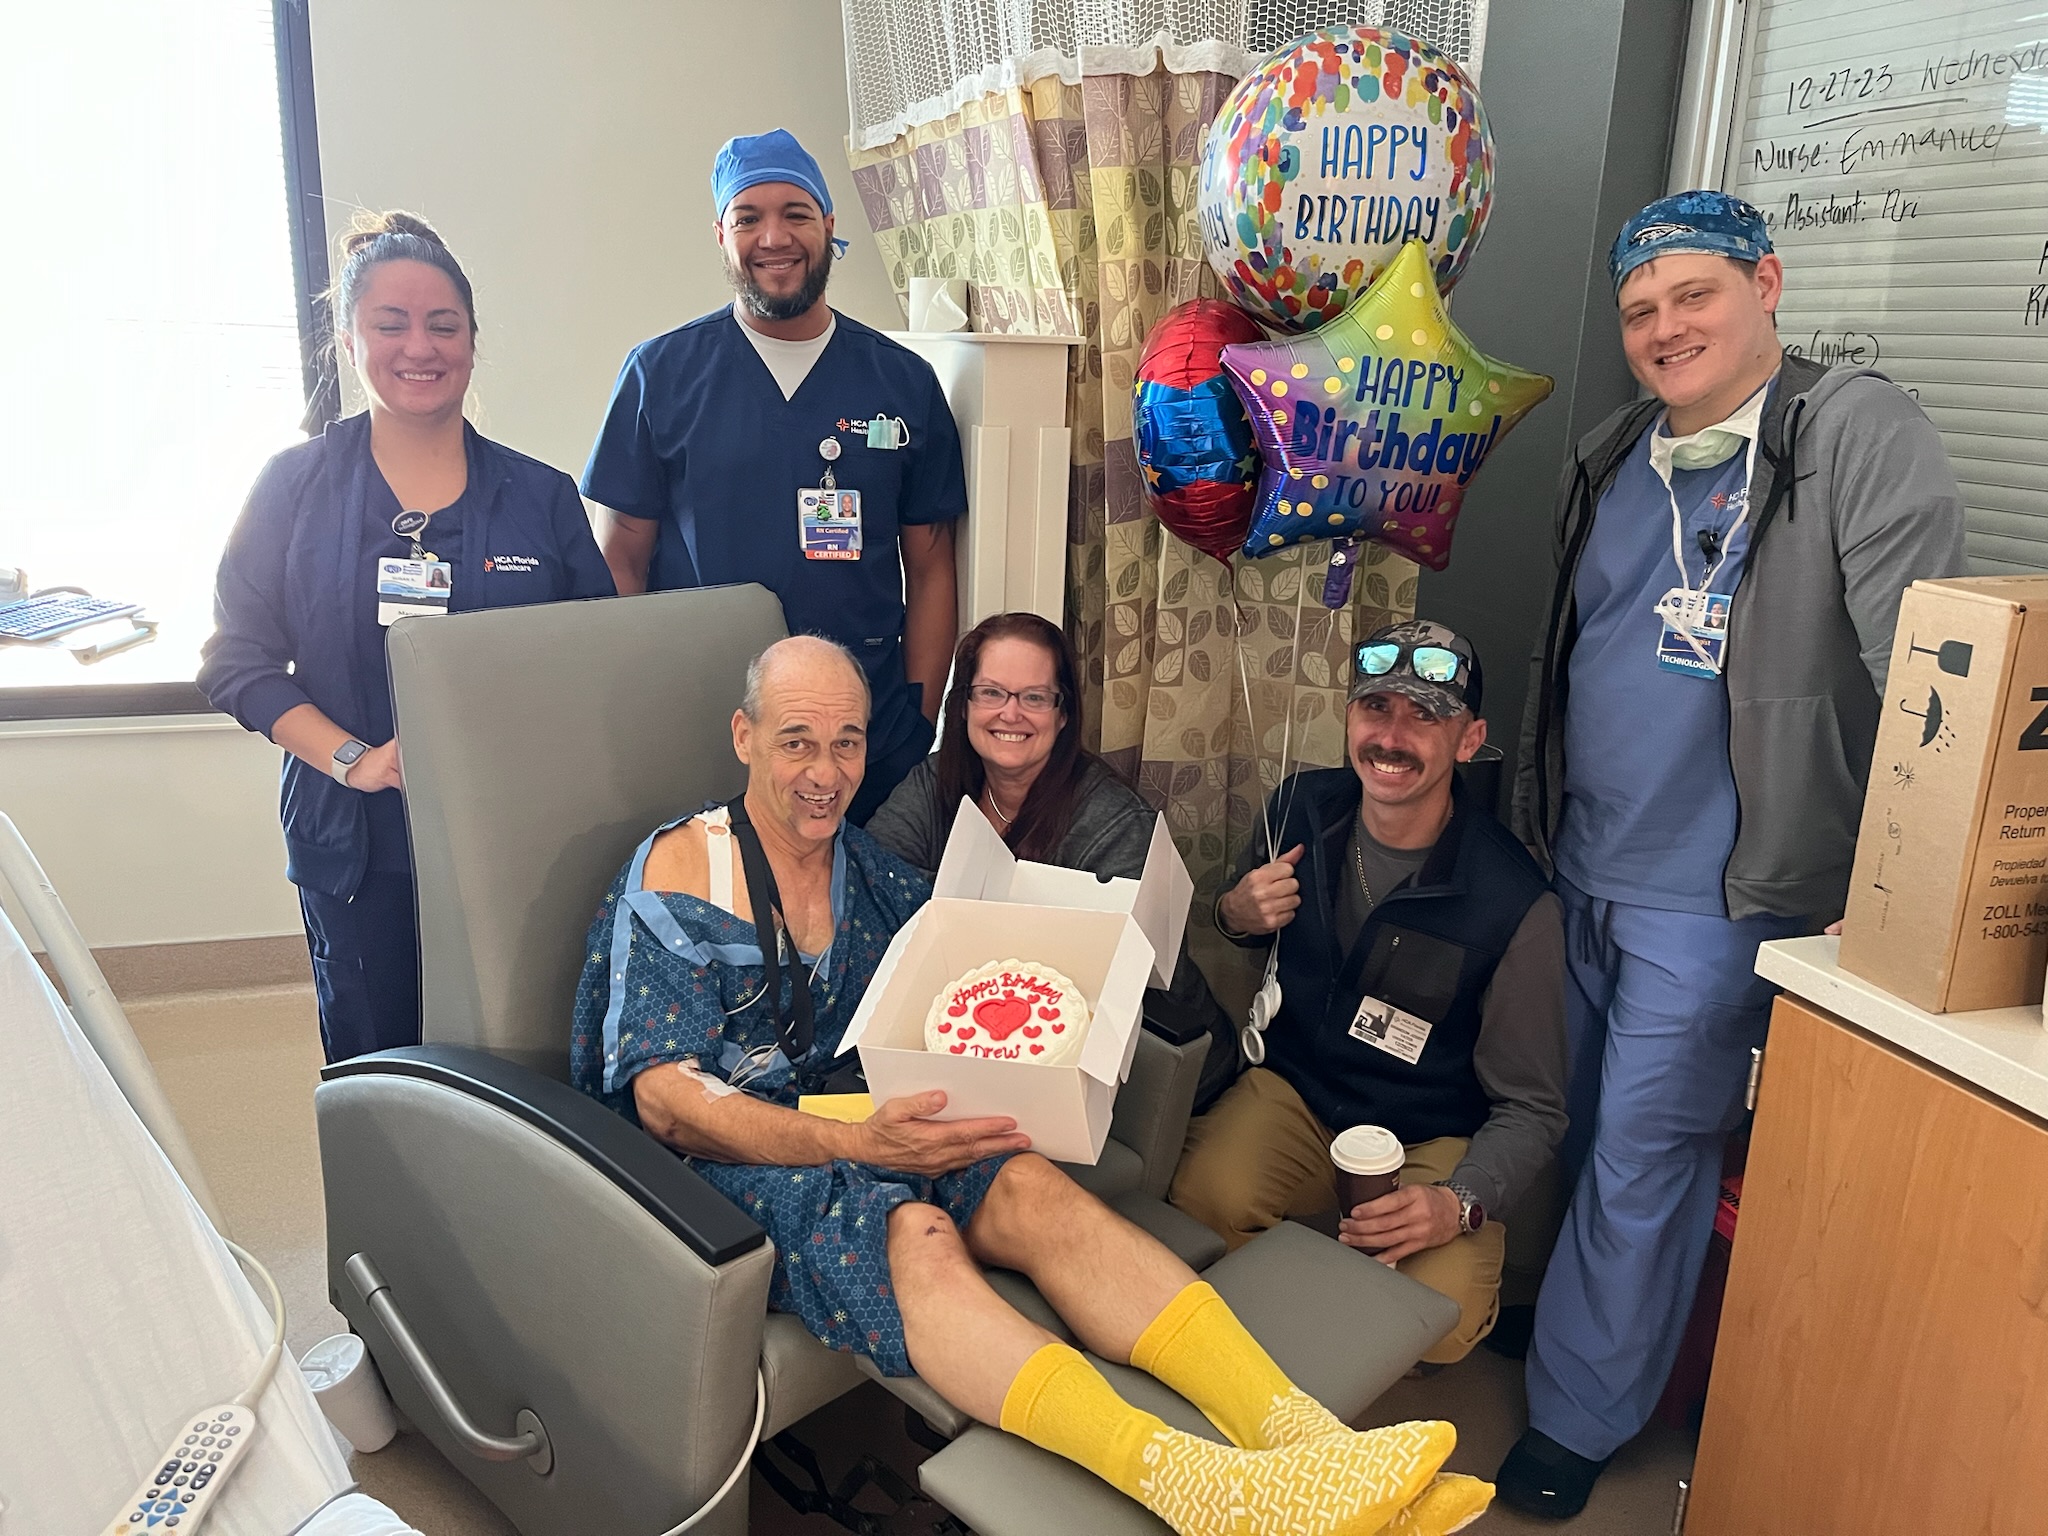 Drew sitting with a cake and a balloon, surrounded by his heroes, the colleagues and EMS team celebrating his birthday after saving his life.